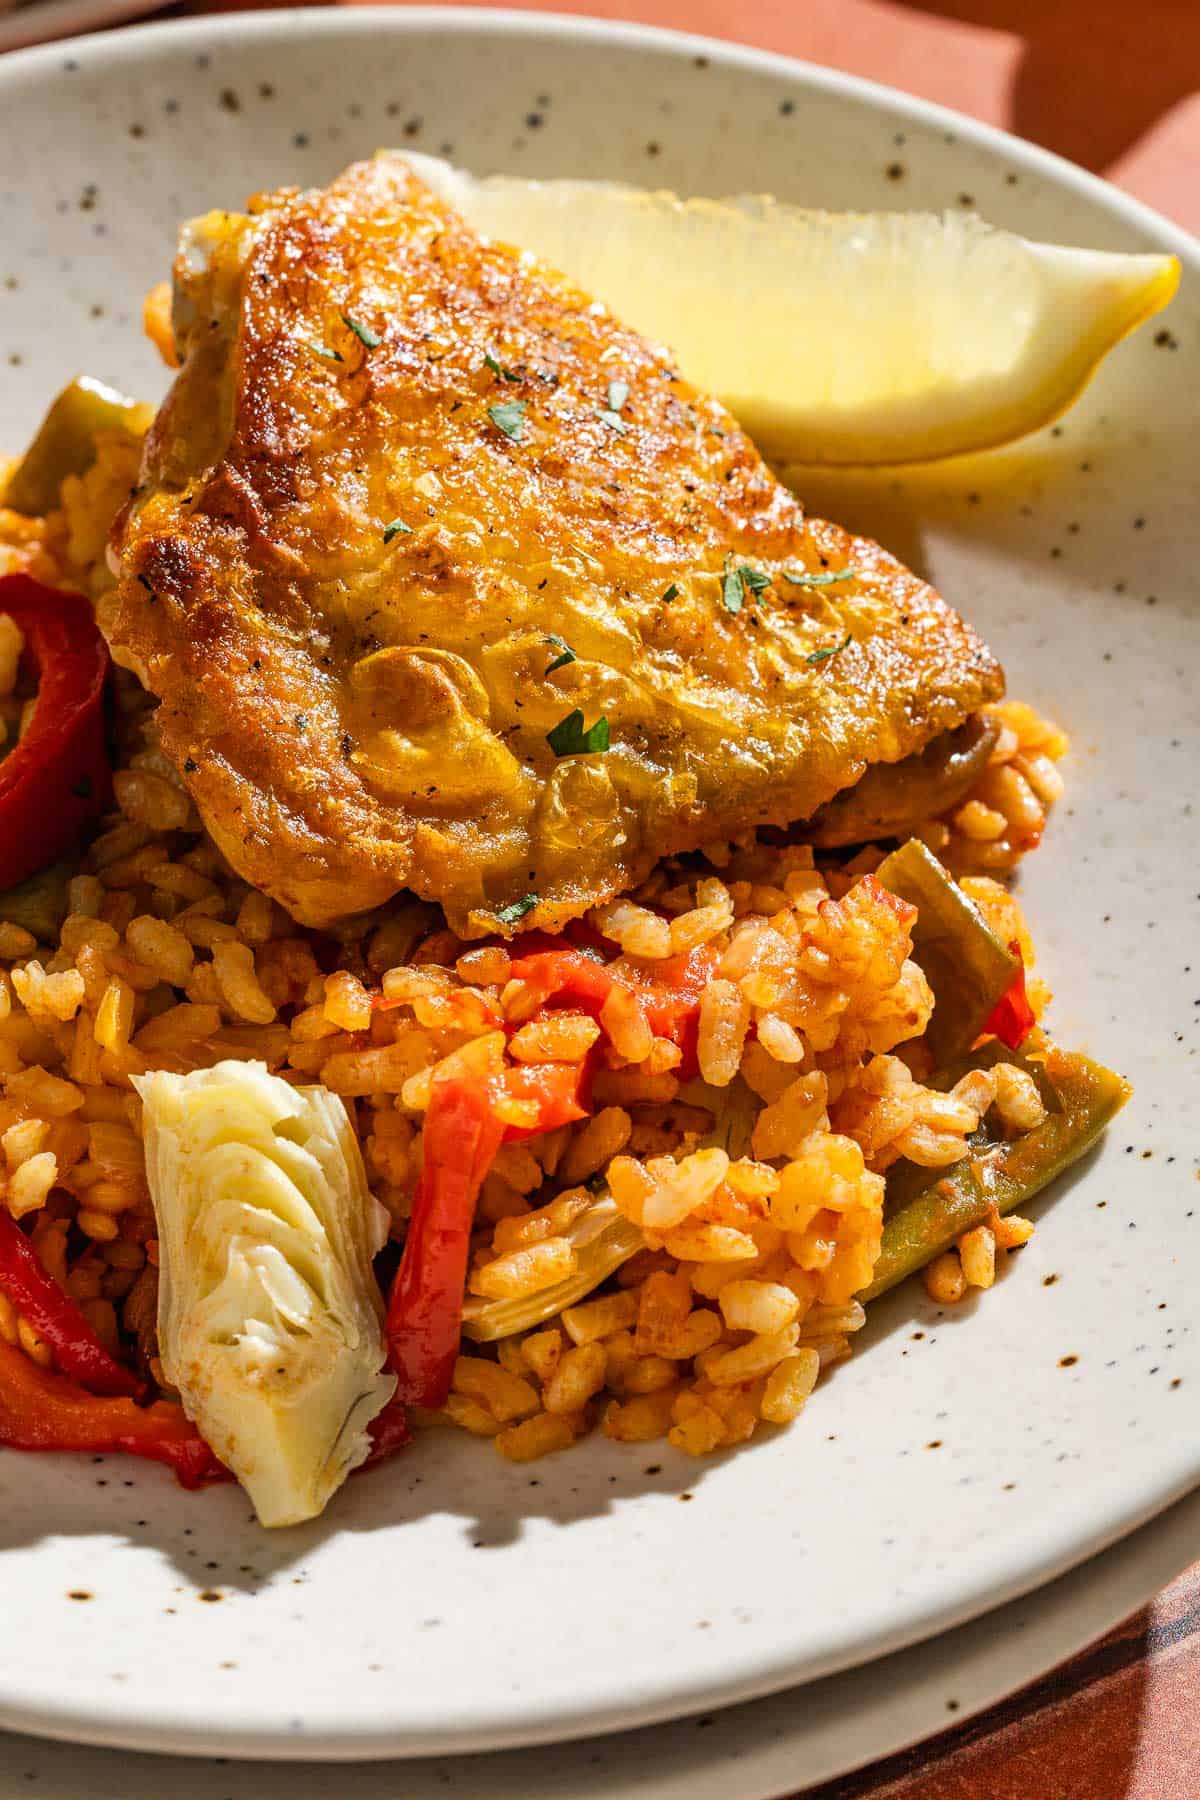 A close up of chicken paella on a plate with a lemon wedge.